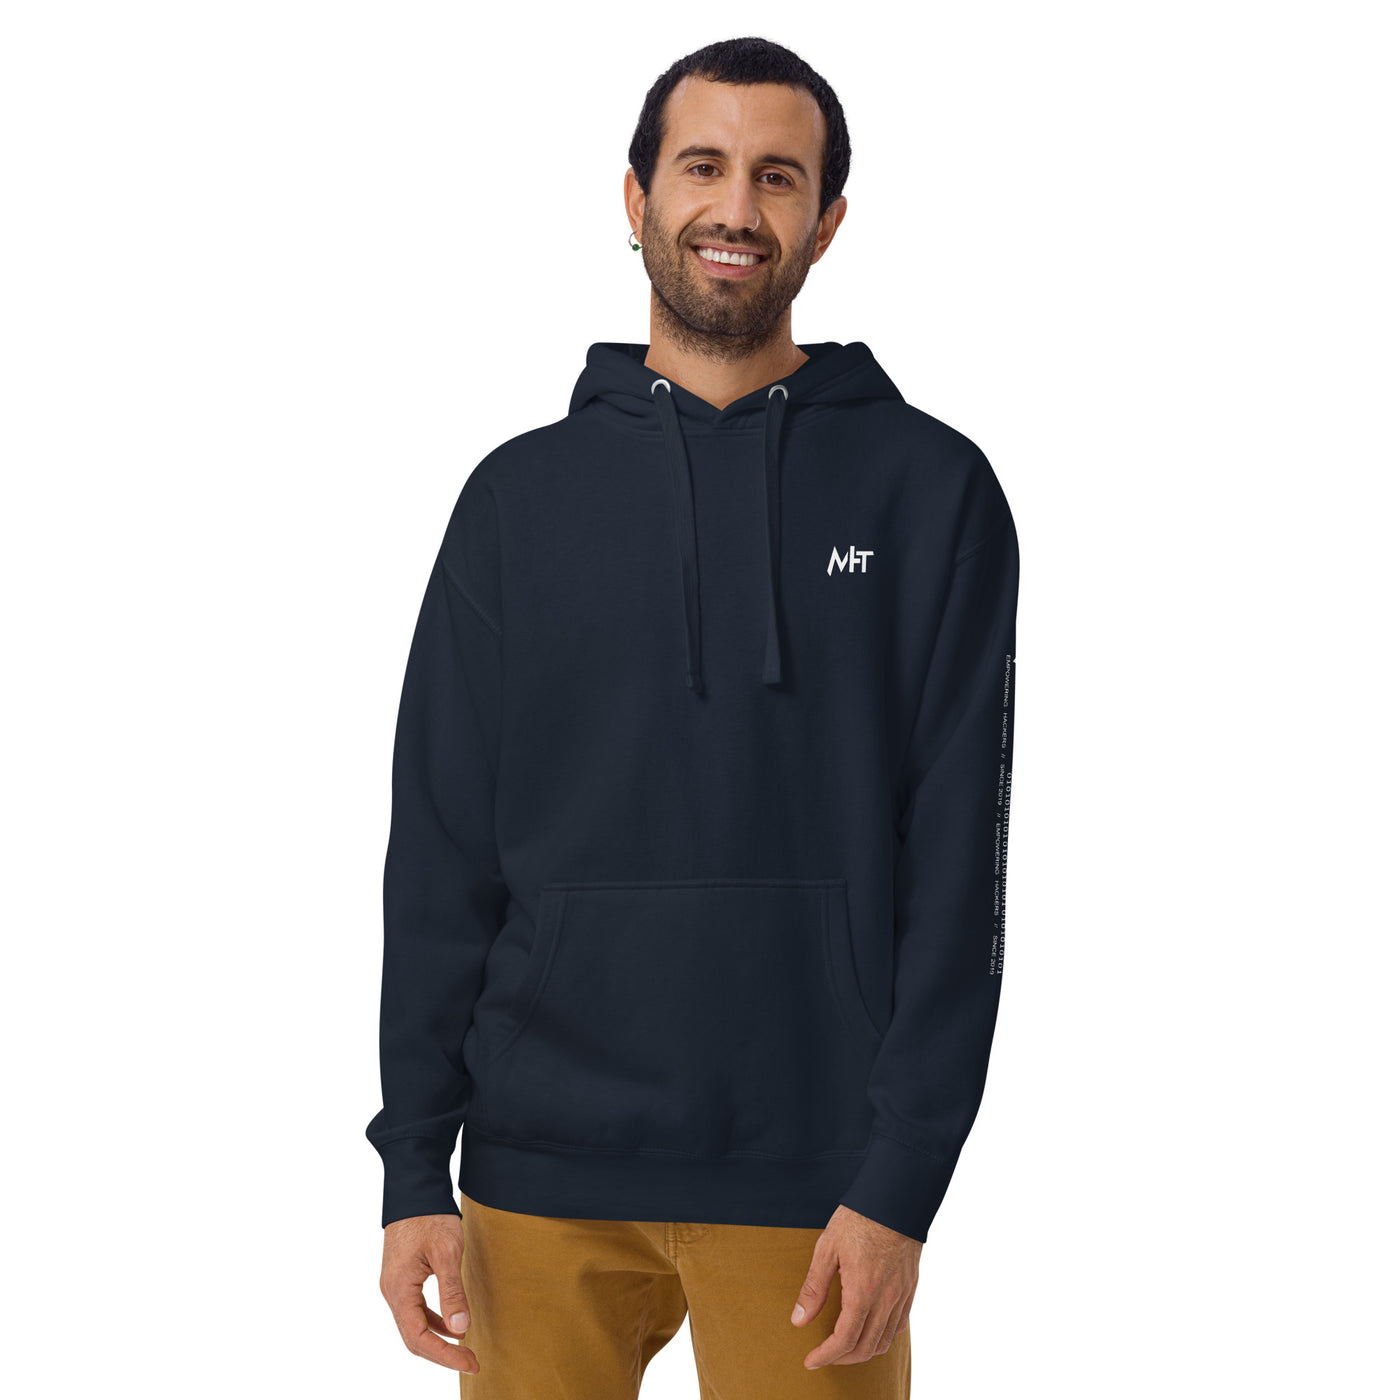 Ask Me about Bitcoin Ape - Unisex Hoodie ( Back Print )